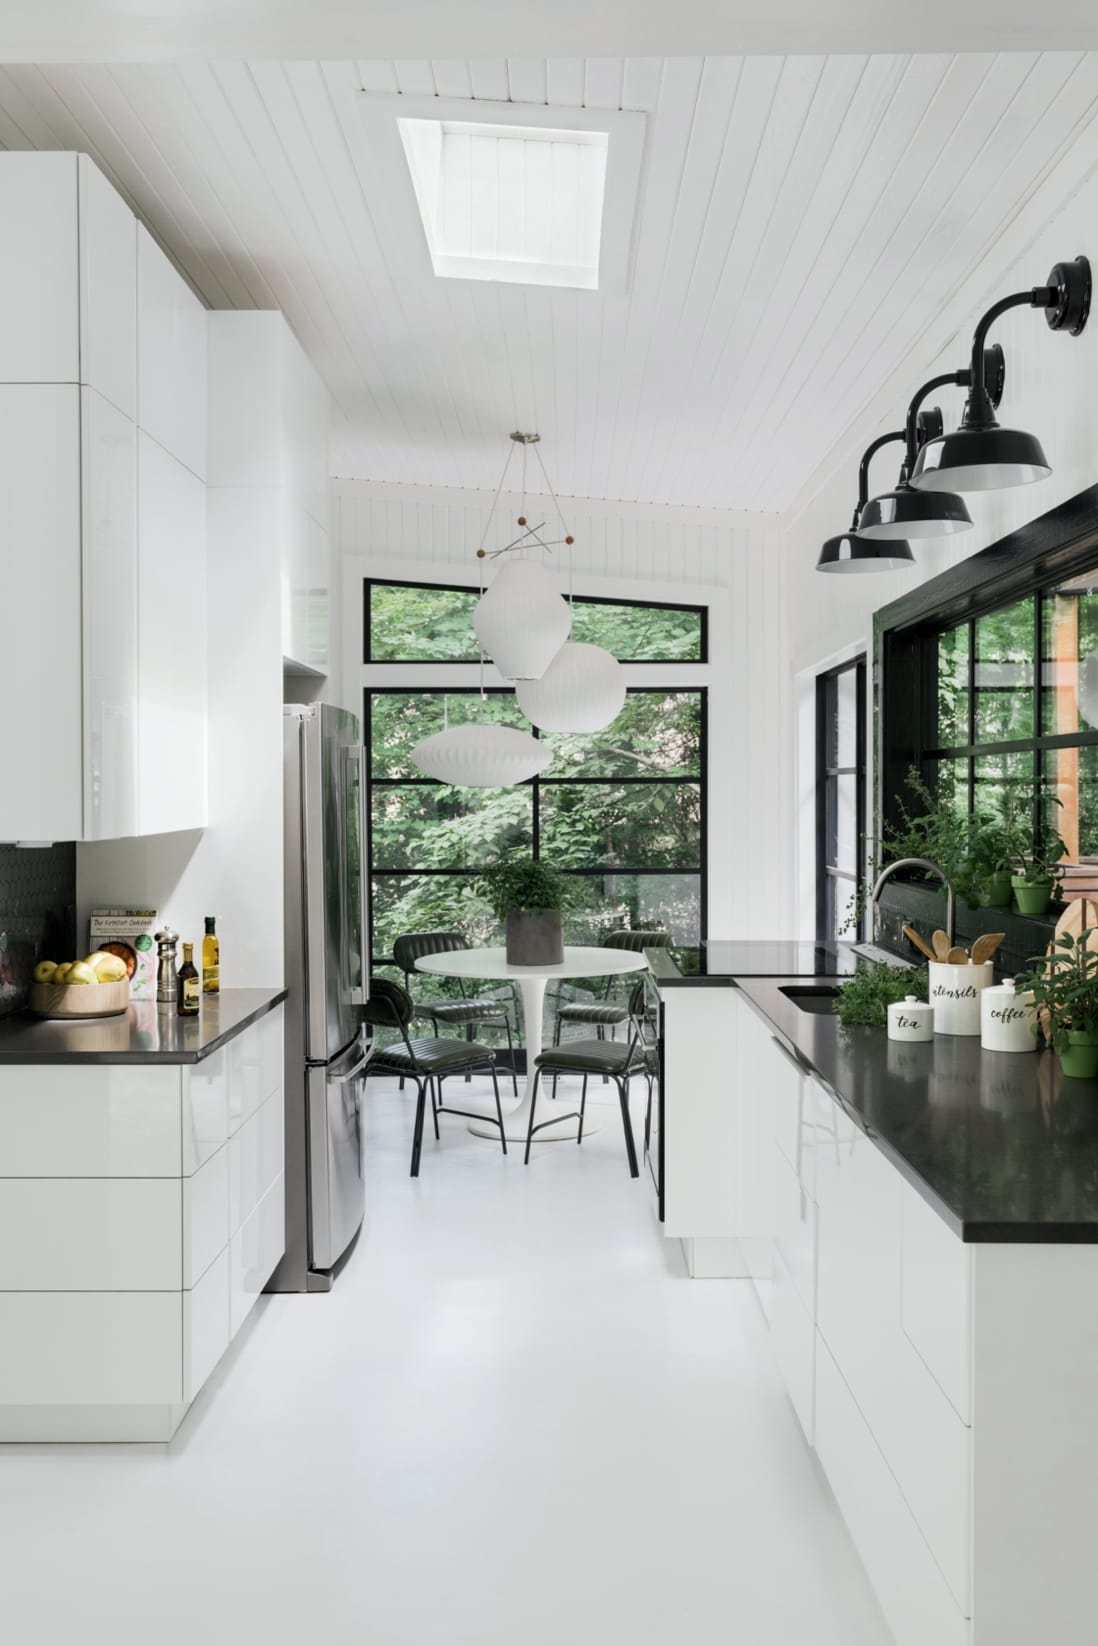 Skylight pours light into a narrow white kitchen with black countertops